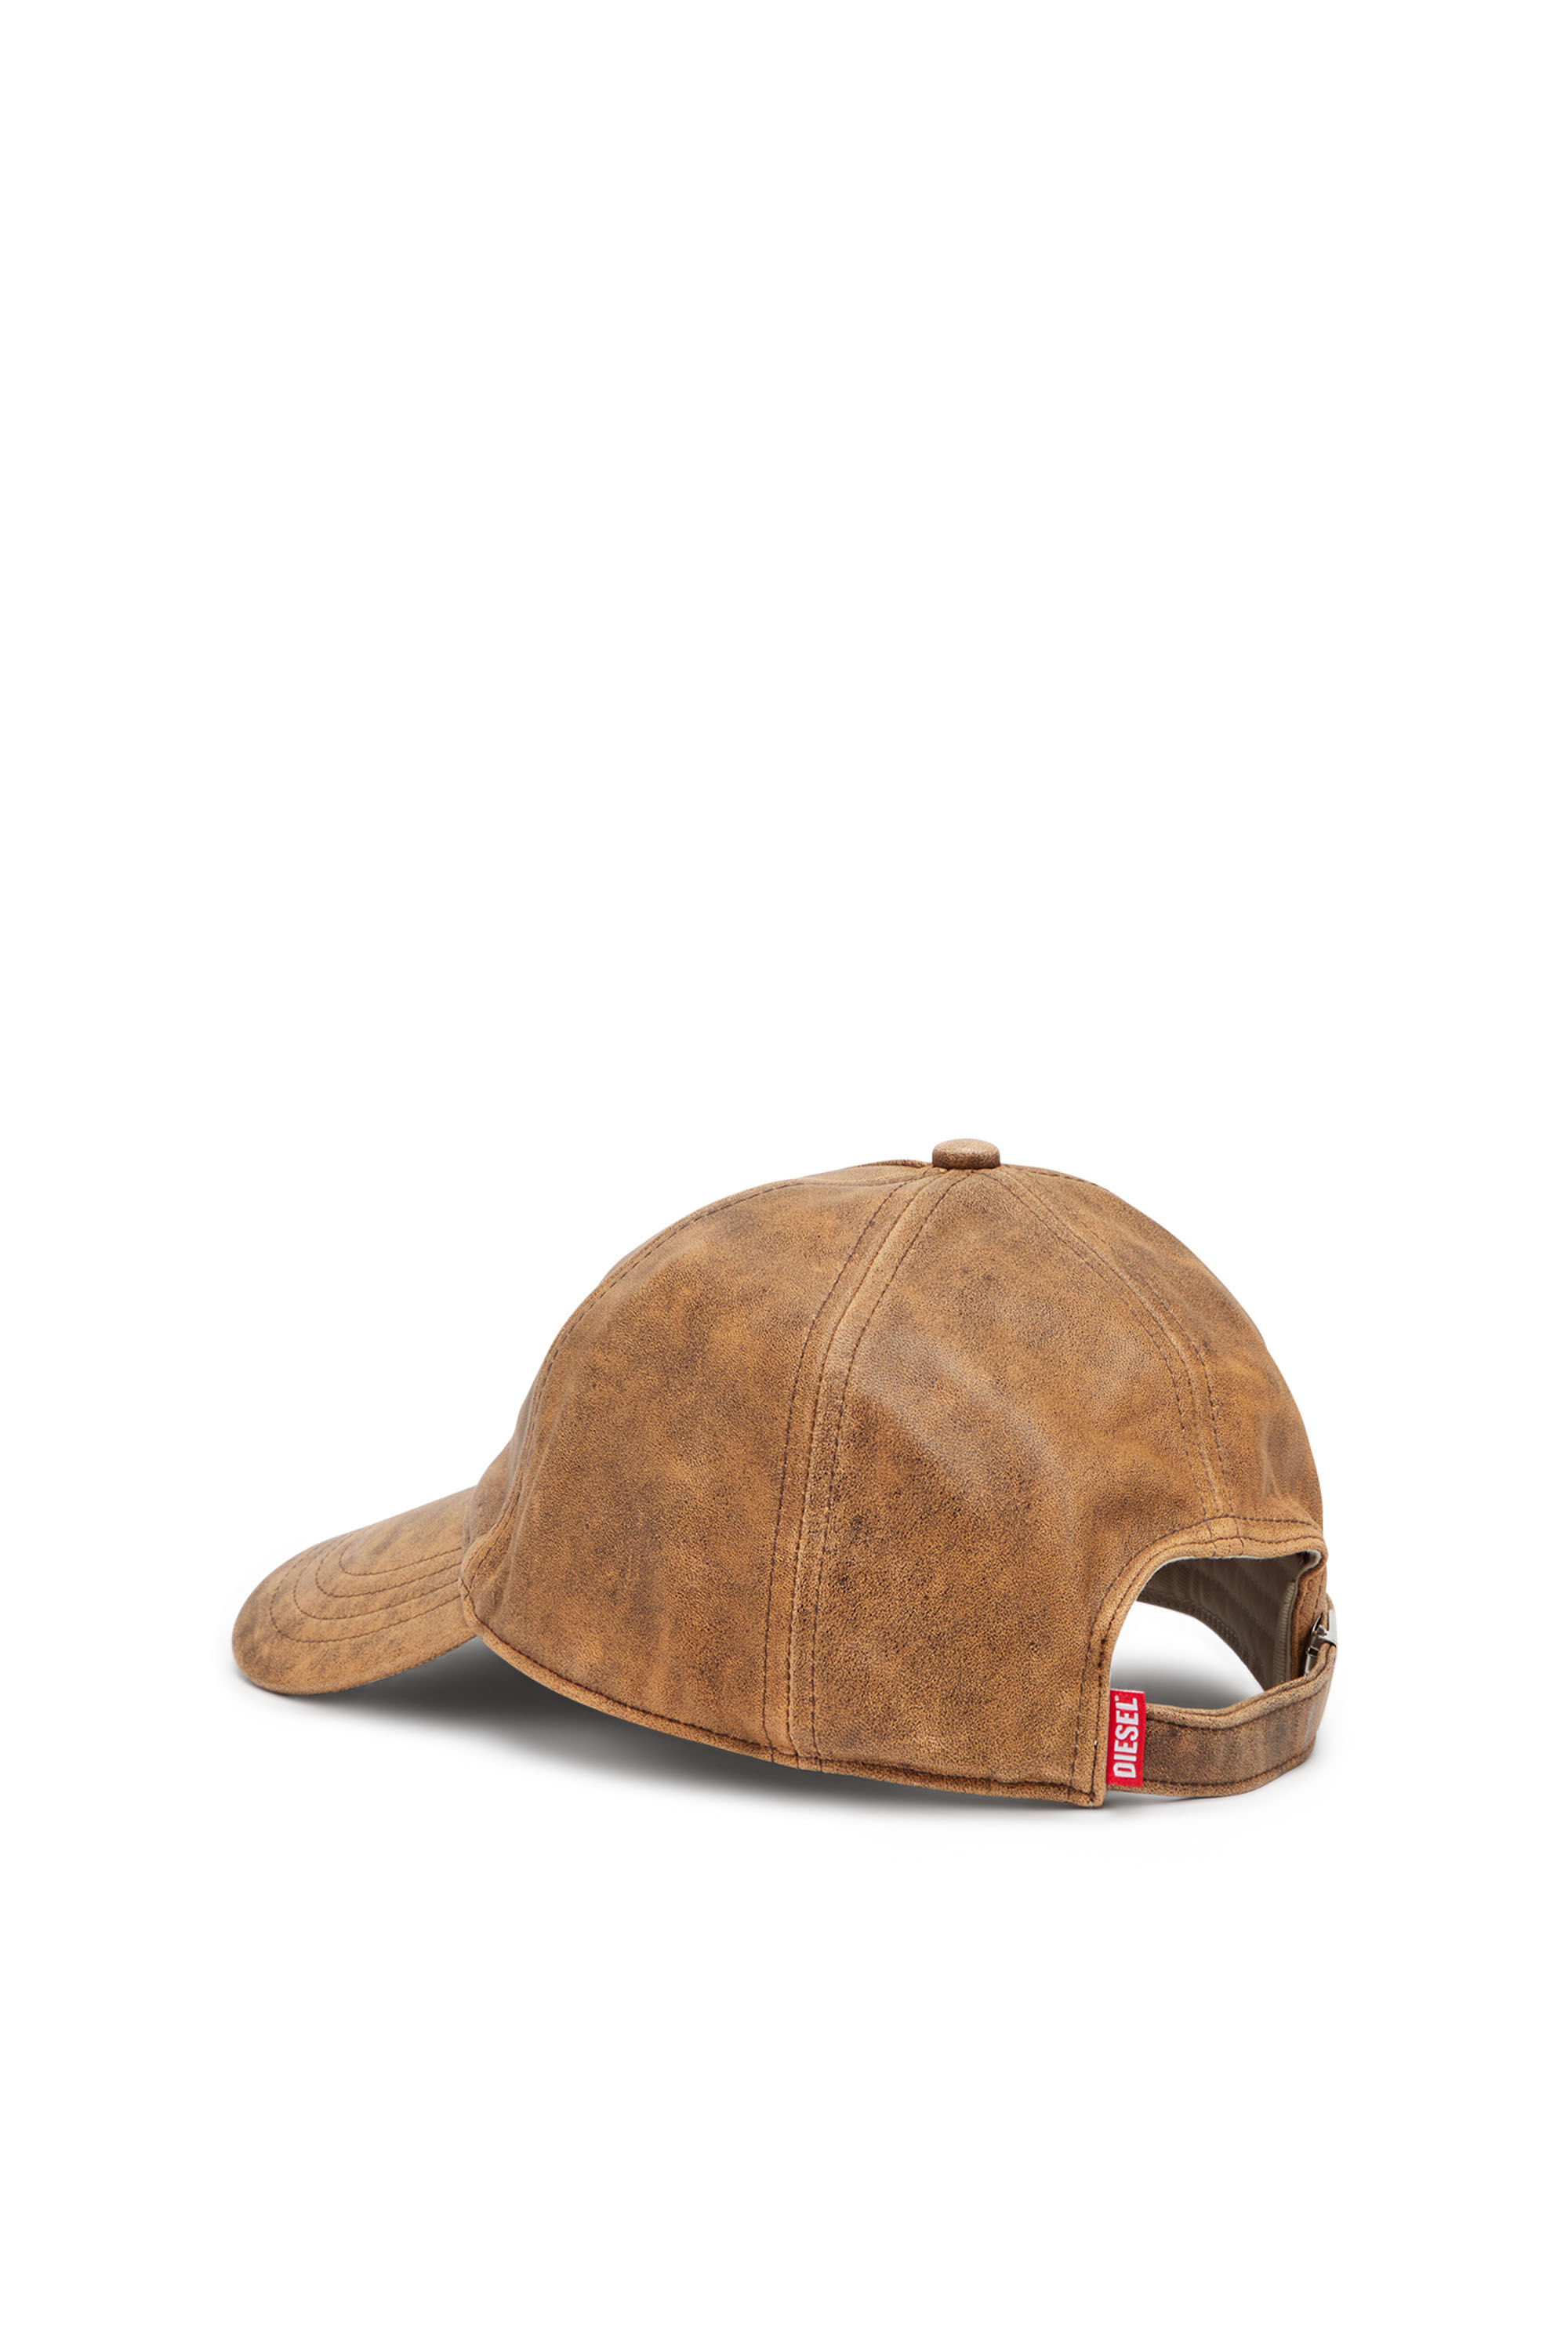 Diesel - C-BAR, Male Baseball cap in treated leather in Brown - Image 2